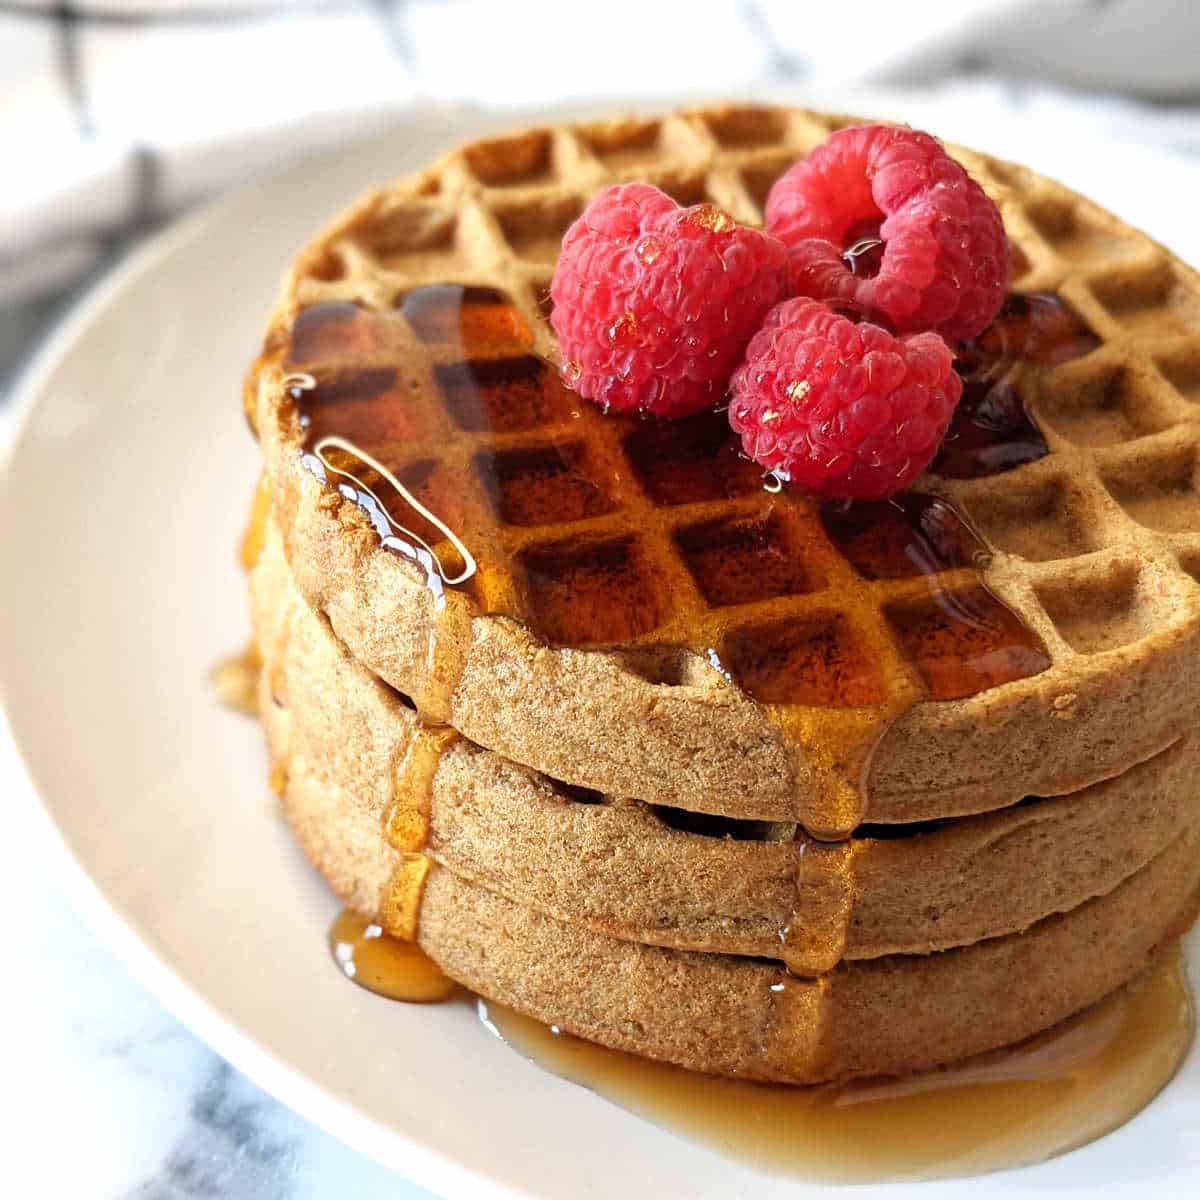 Air fried frozen waffles stacked on a plate topped with raspberries and maple syrup.